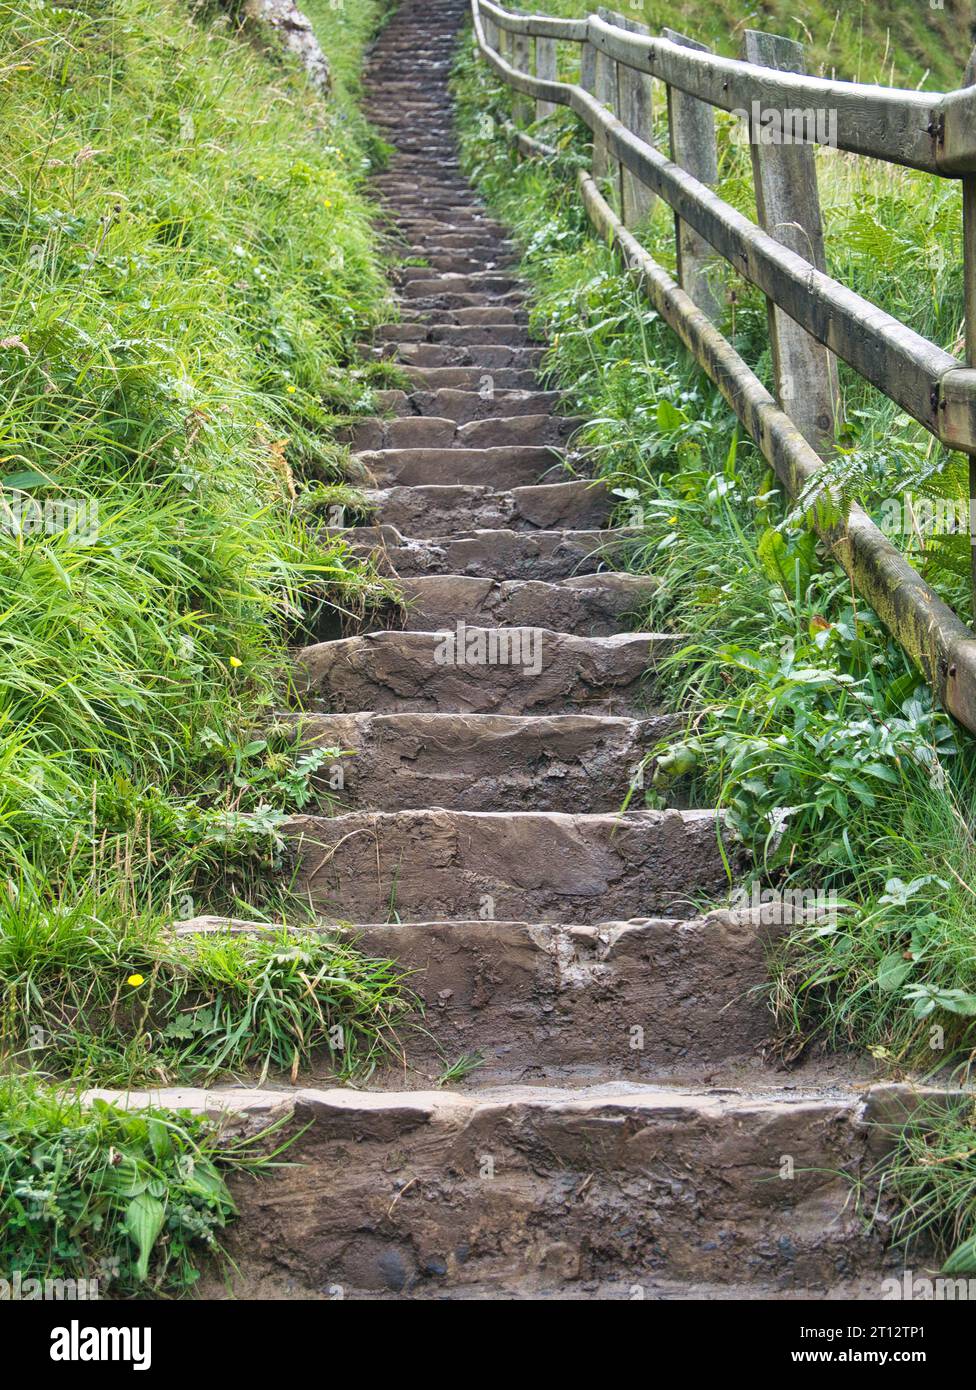 A steep flight of stone steps on a walking trail, surrounded by lush, green foliage and a wooden handrail on the right. Stock Photo